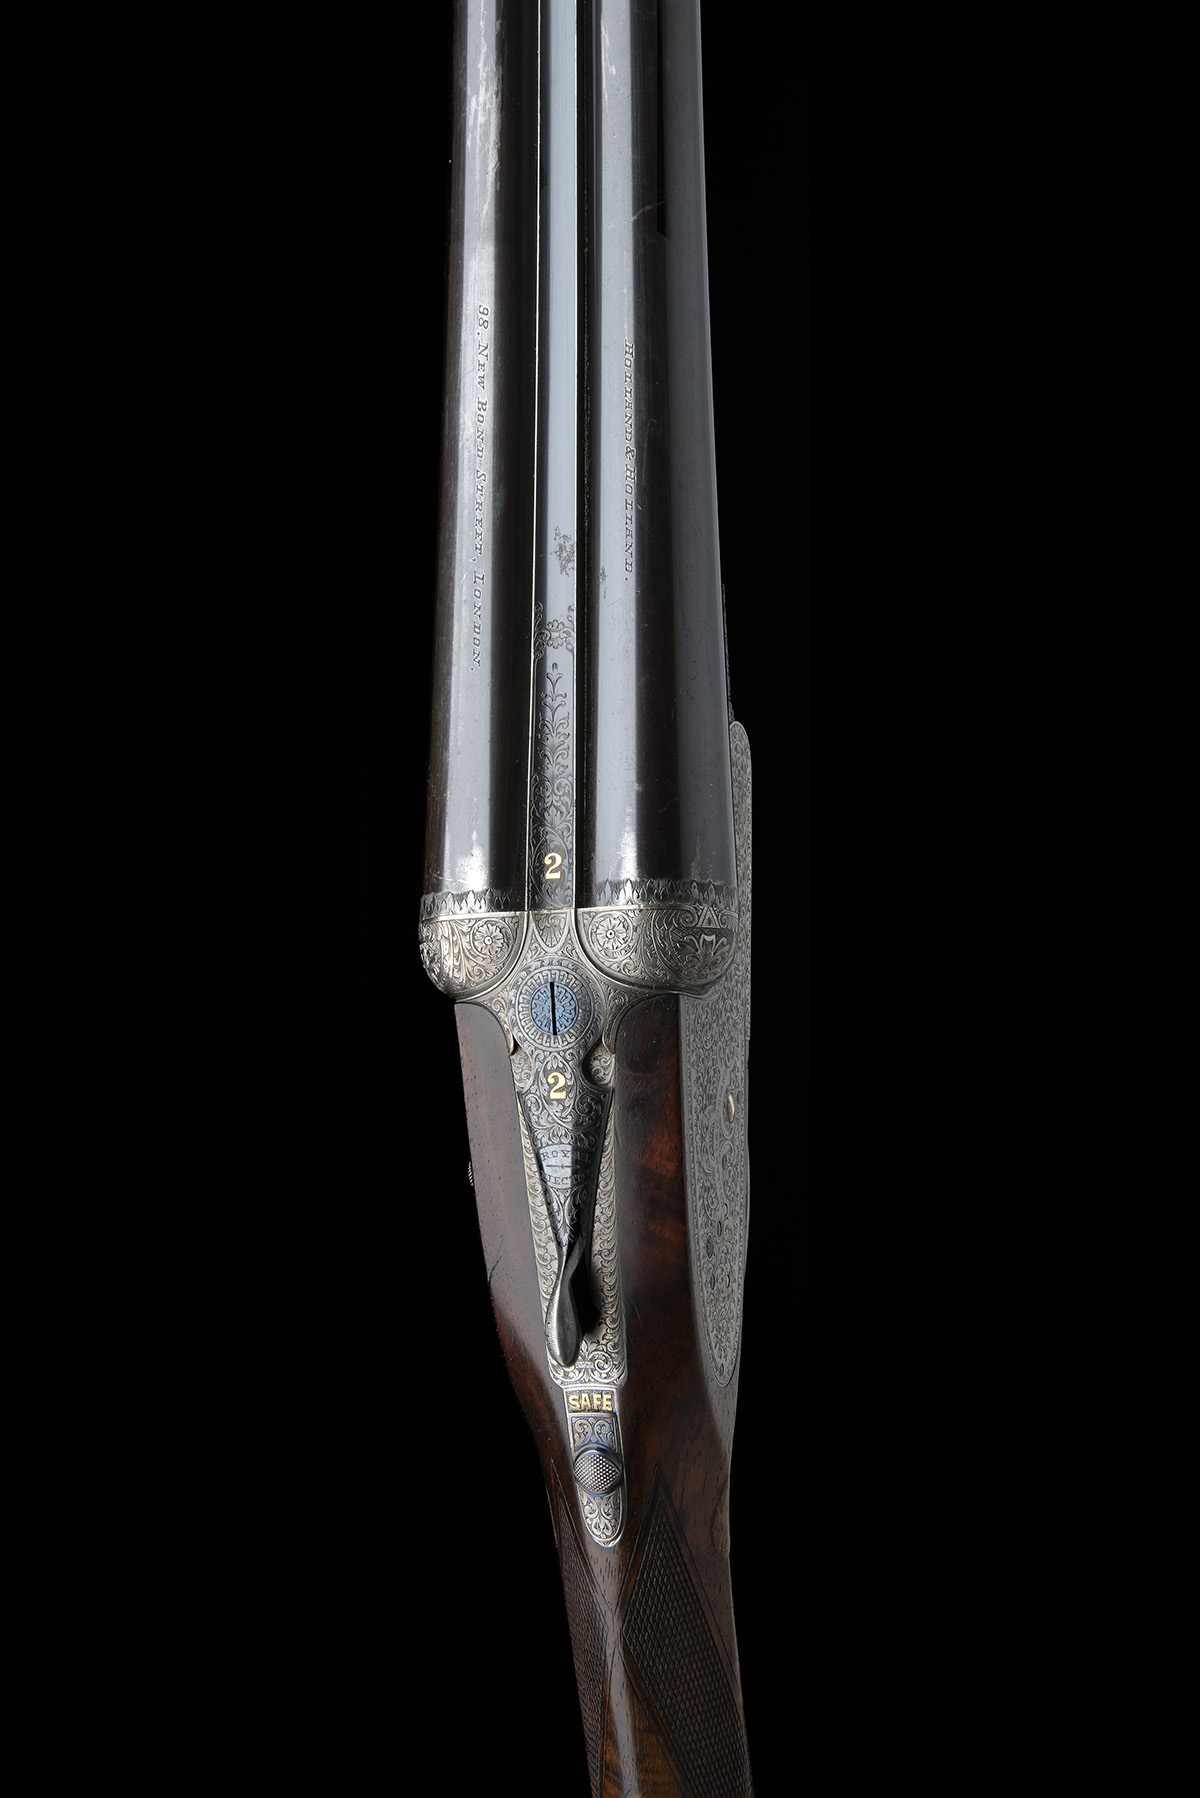 HOLLAND & HOLLAND A 12-BORE 'ROYAL' SELF-OPENING HAND-DETACHABLE SIDELOCK EJECTOR, serial no. 30890, - Image 2 of 7